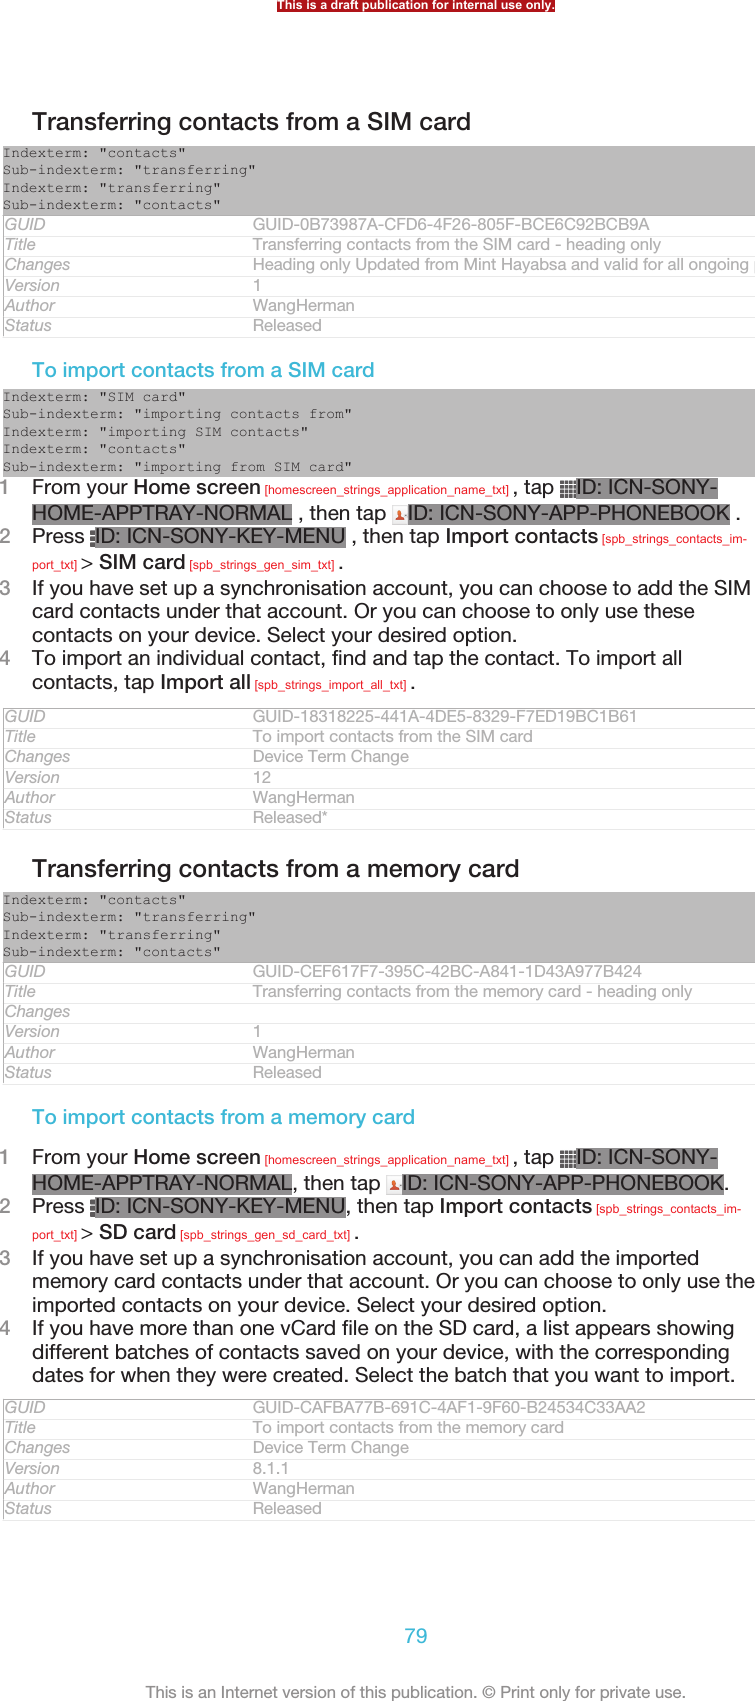 Transferring contacts from a SIM cardIndexterm: &quot;contacts&quot;Sub-indexterm: &quot;transferring&quot;Indexterm: &quot;transferring&quot;Sub-indexterm: &quot;contacts&quot;GUID GUID-0B73987A-CFD6-4F26-805F-BCE6C92BCB9ATitle Transferring contacts from the SIM card - heading onlyChanges Heading only Updated from Mint Hayabsa and valid for all ongoing projectsVersion 1Author WangHermanStatus ReleasedTo import contacts from a SIM cardIndexterm: &quot;SIM card&quot;Sub-indexterm: &quot;importing contacts from&quot;Indexterm: &quot;importing SIM contacts&quot;Indexterm: &quot;contacts&quot;Sub-indexterm: &quot;importing from SIM card&quot;1From your Home screen [homescreen_strings_application_name_txt] , tap  ID: ICN-SONY-HOME-APPTRAY-NORMAL , then tap  ID: ICN-SONY-APP-PHONEBOOK .2Press  ID: ICN-SONY-KEY-MENU , then tap Import contacts [spb_strings_contacts_im-port_txt] &gt; SIM card [spb_strings_gen_sim_txt] .3If you have set up a synchronisation account, you can choose to add the SIMcard contacts under that account. Or you can choose to only use thesecontacts on your device. Select your desired option.4To import an individual contact, find and tap the contact. To import allcontacts, tap Import all [spb_strings_import_all_txt] .GUID GUID-18318225-441A-4DE5-8329-F7ED19BC1B61Title To import contacts from the SIM cardChanges Device Term ChangeVersion 12Author WangHermanStatus Released*Transferring contacts from a memory cardIndexterm: &quot;contacts&quot;Sub-indexterm: &quot;transferring&quot;Indexterm: &quot;transferring&quot;Sub-indexterm: &quot;contacts&quot;GUID GUID-CEF617F7-395C-42BC-A841-1D43A977B424Title Transferring contacts from the memory card - heading onlyChangesVersion 1Author WangHermanStatus ReleasedTo import contacts from a memory card1From your Home screen [homescreen_strings_application_name_txt] , tap  ID: ICN-SONY-HOME-APPTRAY-NORMAL, then tap  ID: ICN-SONY-APP-PHONEBOOK.2Press  ID: ICN-SONY-KEY-MENU, then tap Import contacts [spb_strings_contacts_im-port_txt] &gt; SD card [spb_strings_gen_sd_card_txt] .3If you have set up a synchronisation account, you can add the importedmemory card contacts under that account. Or you can choose to only use theimported contacts on your device. Select your desired option.4If you have more than one vCard file on the SD card, a list appears showingdifferent batches of contacts saved on your device, with the correspondingdates for when they were created. Select the batch that you want to import.GUID GUID-CAFBA77B-691C-4AF1-9F60-B24534C33AA2Title To import contacts from the memory cardChanges Device Term ChangeVersion 8.1.1Author WangHermanStatus ReleasedThis is a draft publication for internal use only.79This is an Internet version of this publication. © Print only for private use.